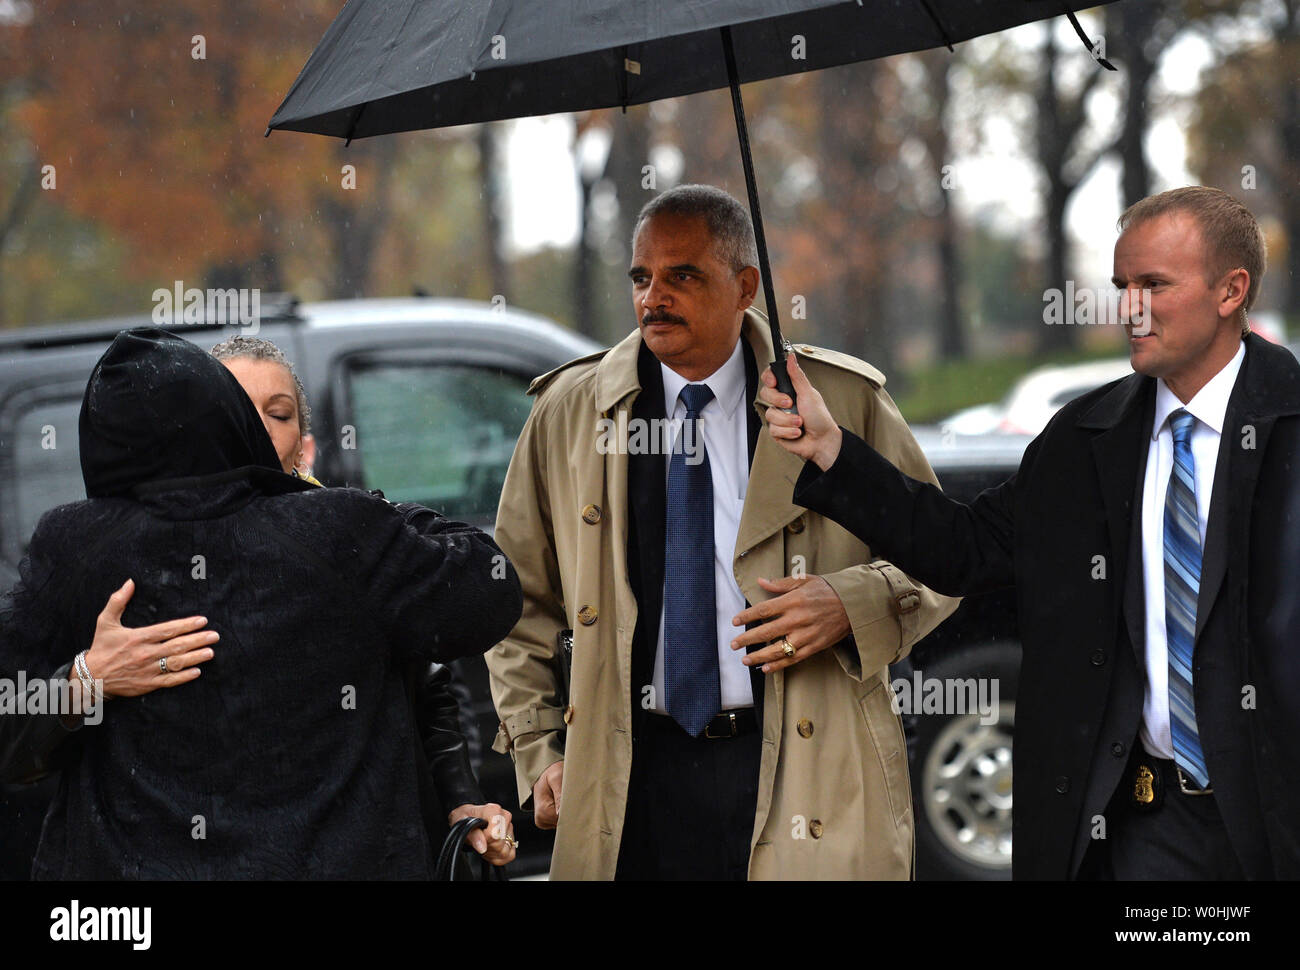 Attorney Genaral Eric Holder arrives for a memorial tree planting for Emmett Till, on the ground of the U.S. Capitol in Washington, D.C. on November 17, 2014.  Till, was a young African-American man whose brutal killing in 1955 raised public awareness that led to important civil rights reforms in our nation. UPI/Kevin Dietsch Stock Photo